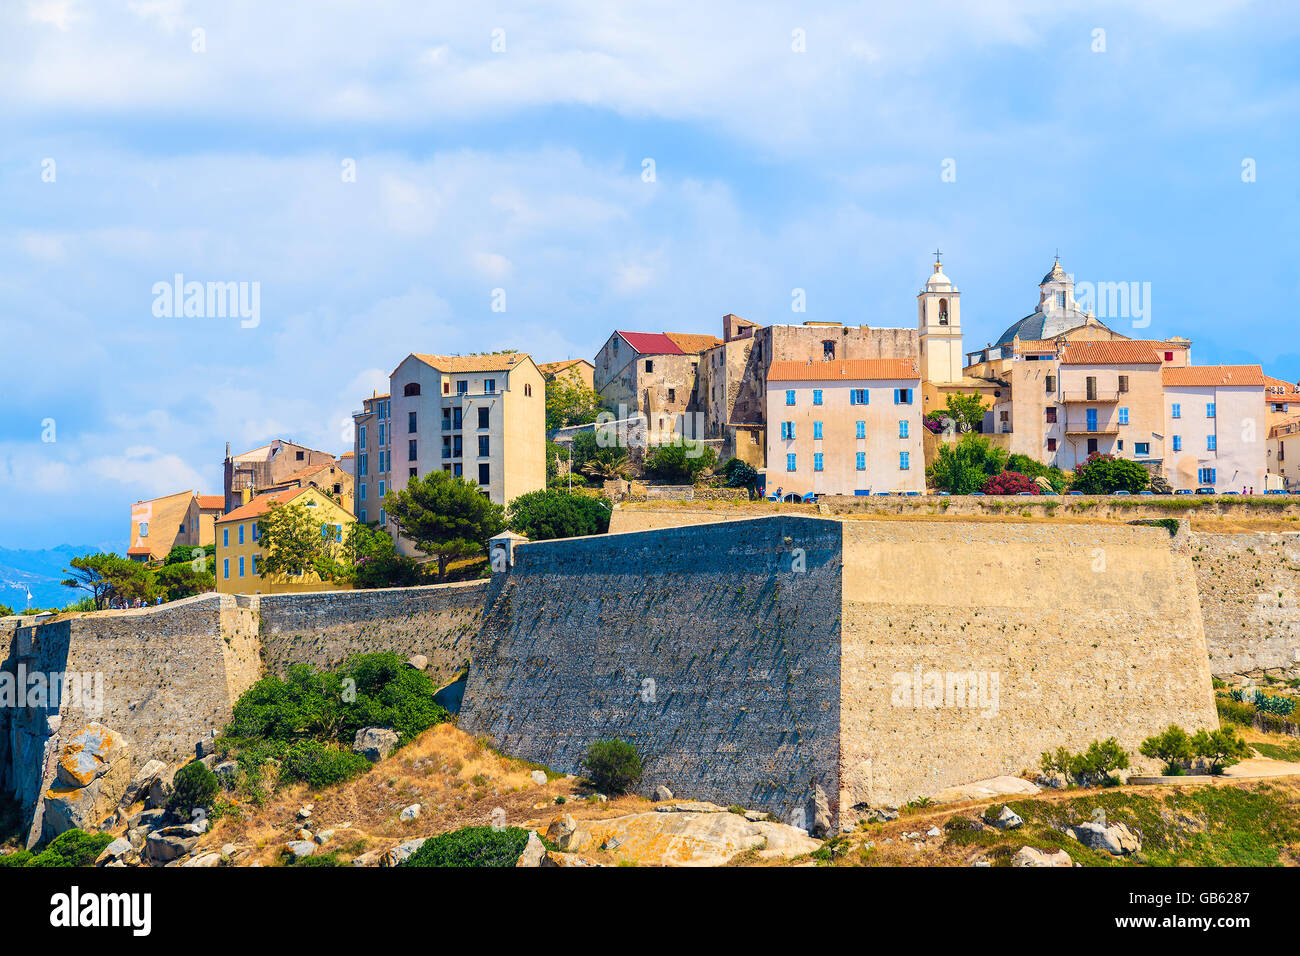 A view of Calvi old town and city walls, Corsica island, France Stock Photo